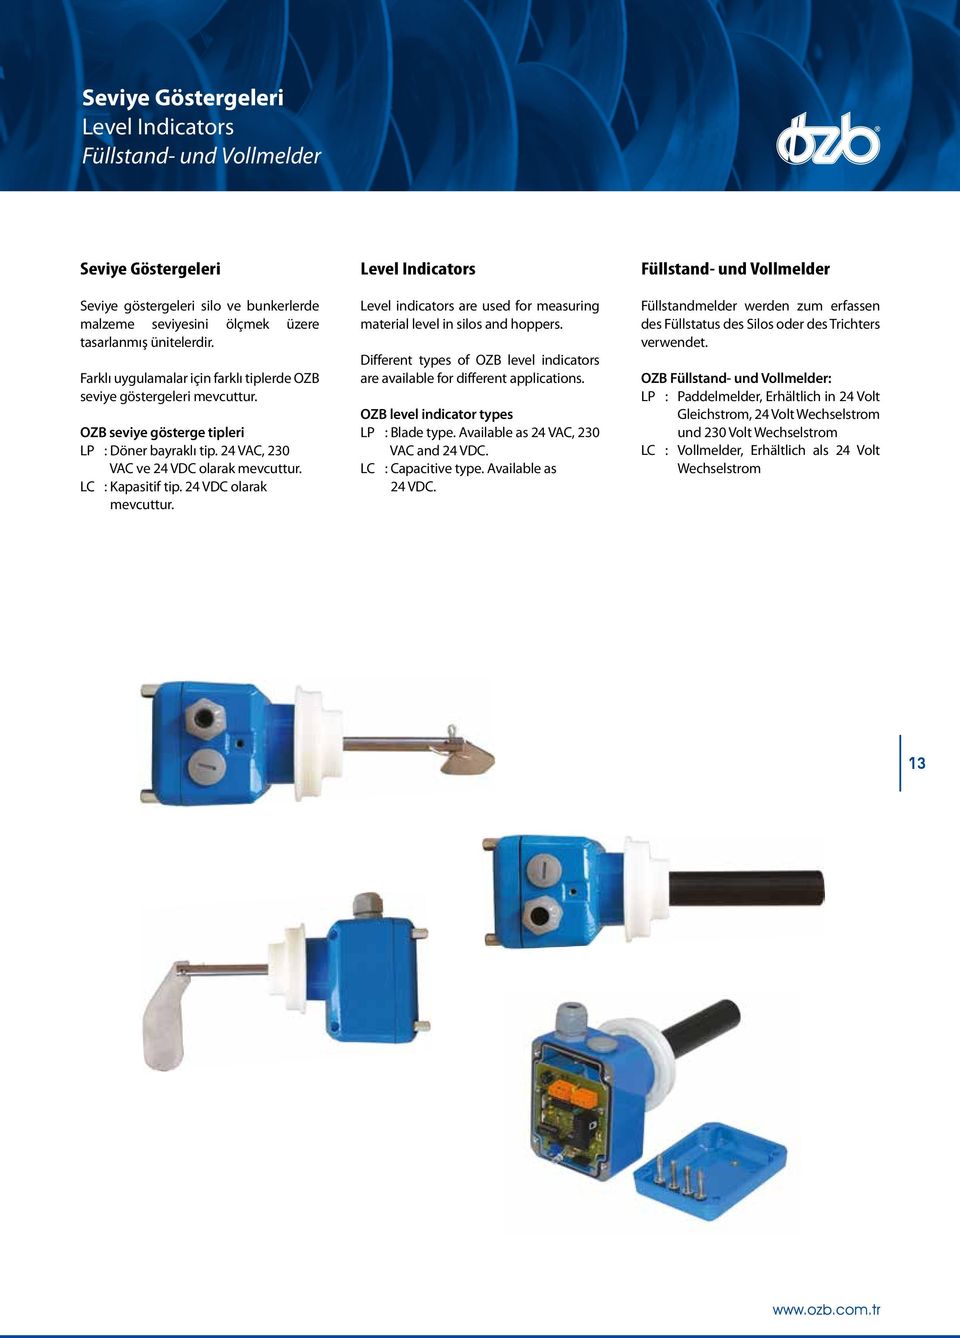 24 VDC olarak mevcuttur. Level Indicators Level indicators are used for measuring material level in silos and hoppers. Different types of OZB level indicators are available for different applications.